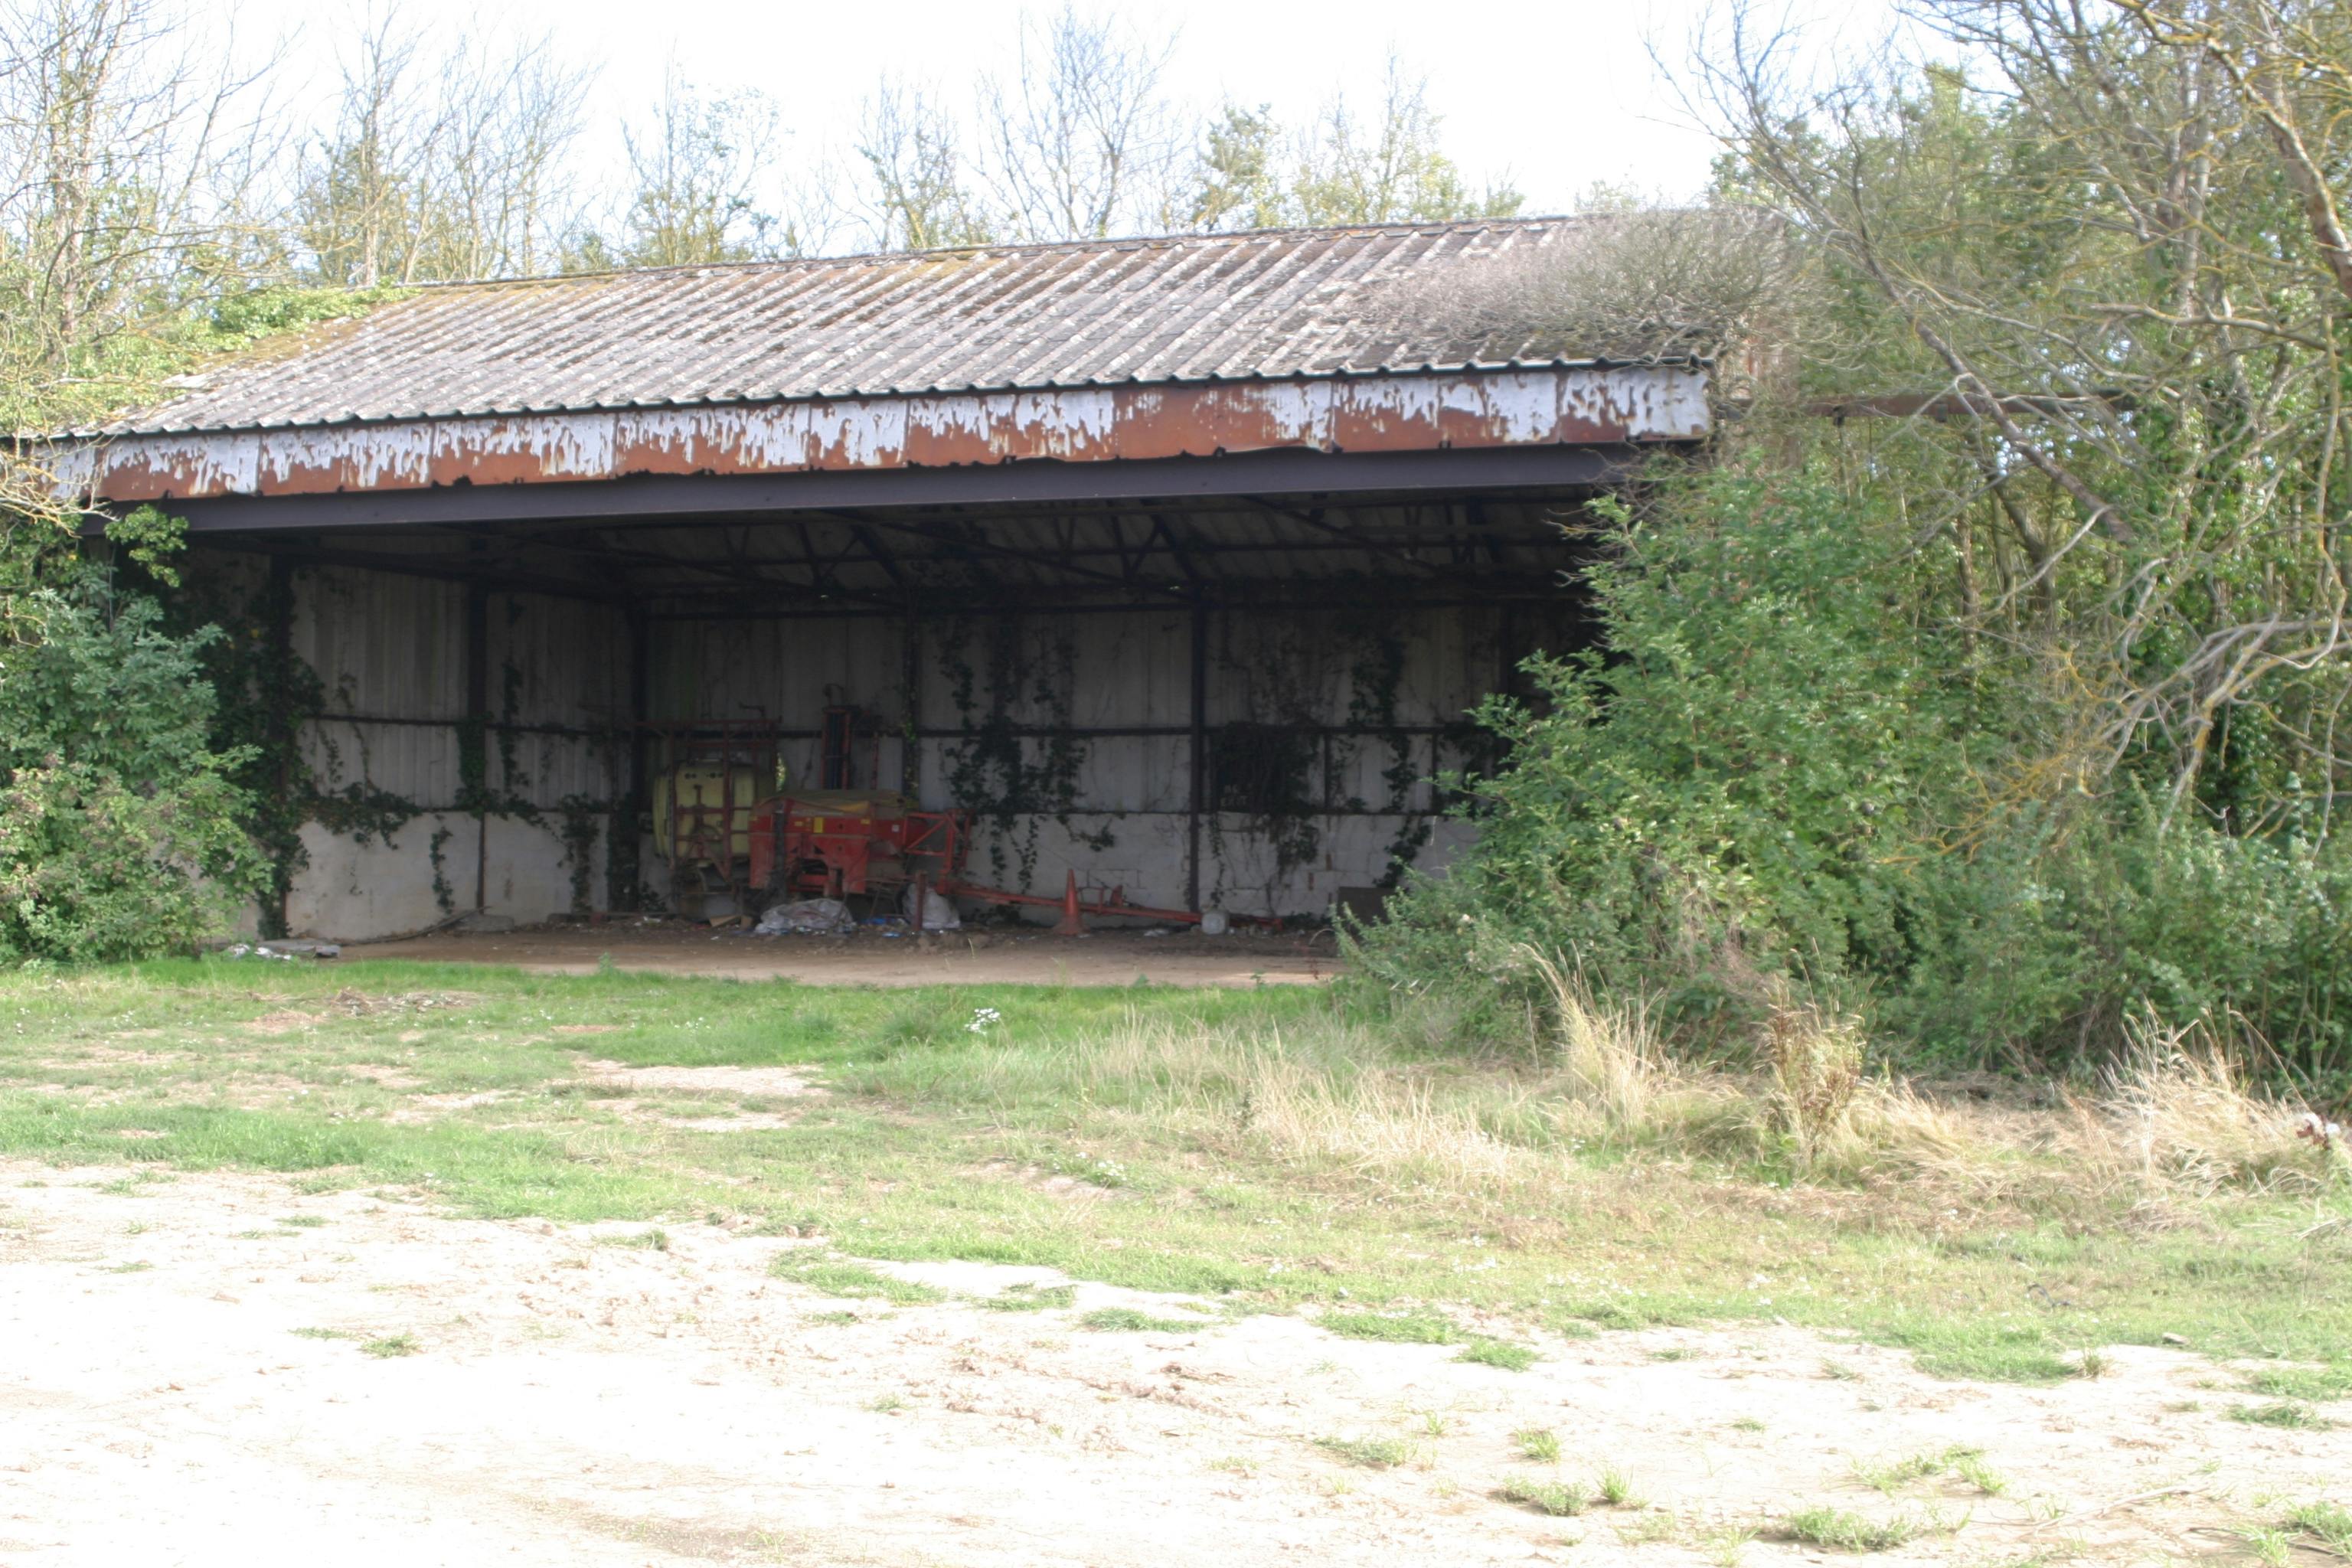 Image of the RAF Selsey aircraft hangar from 2006